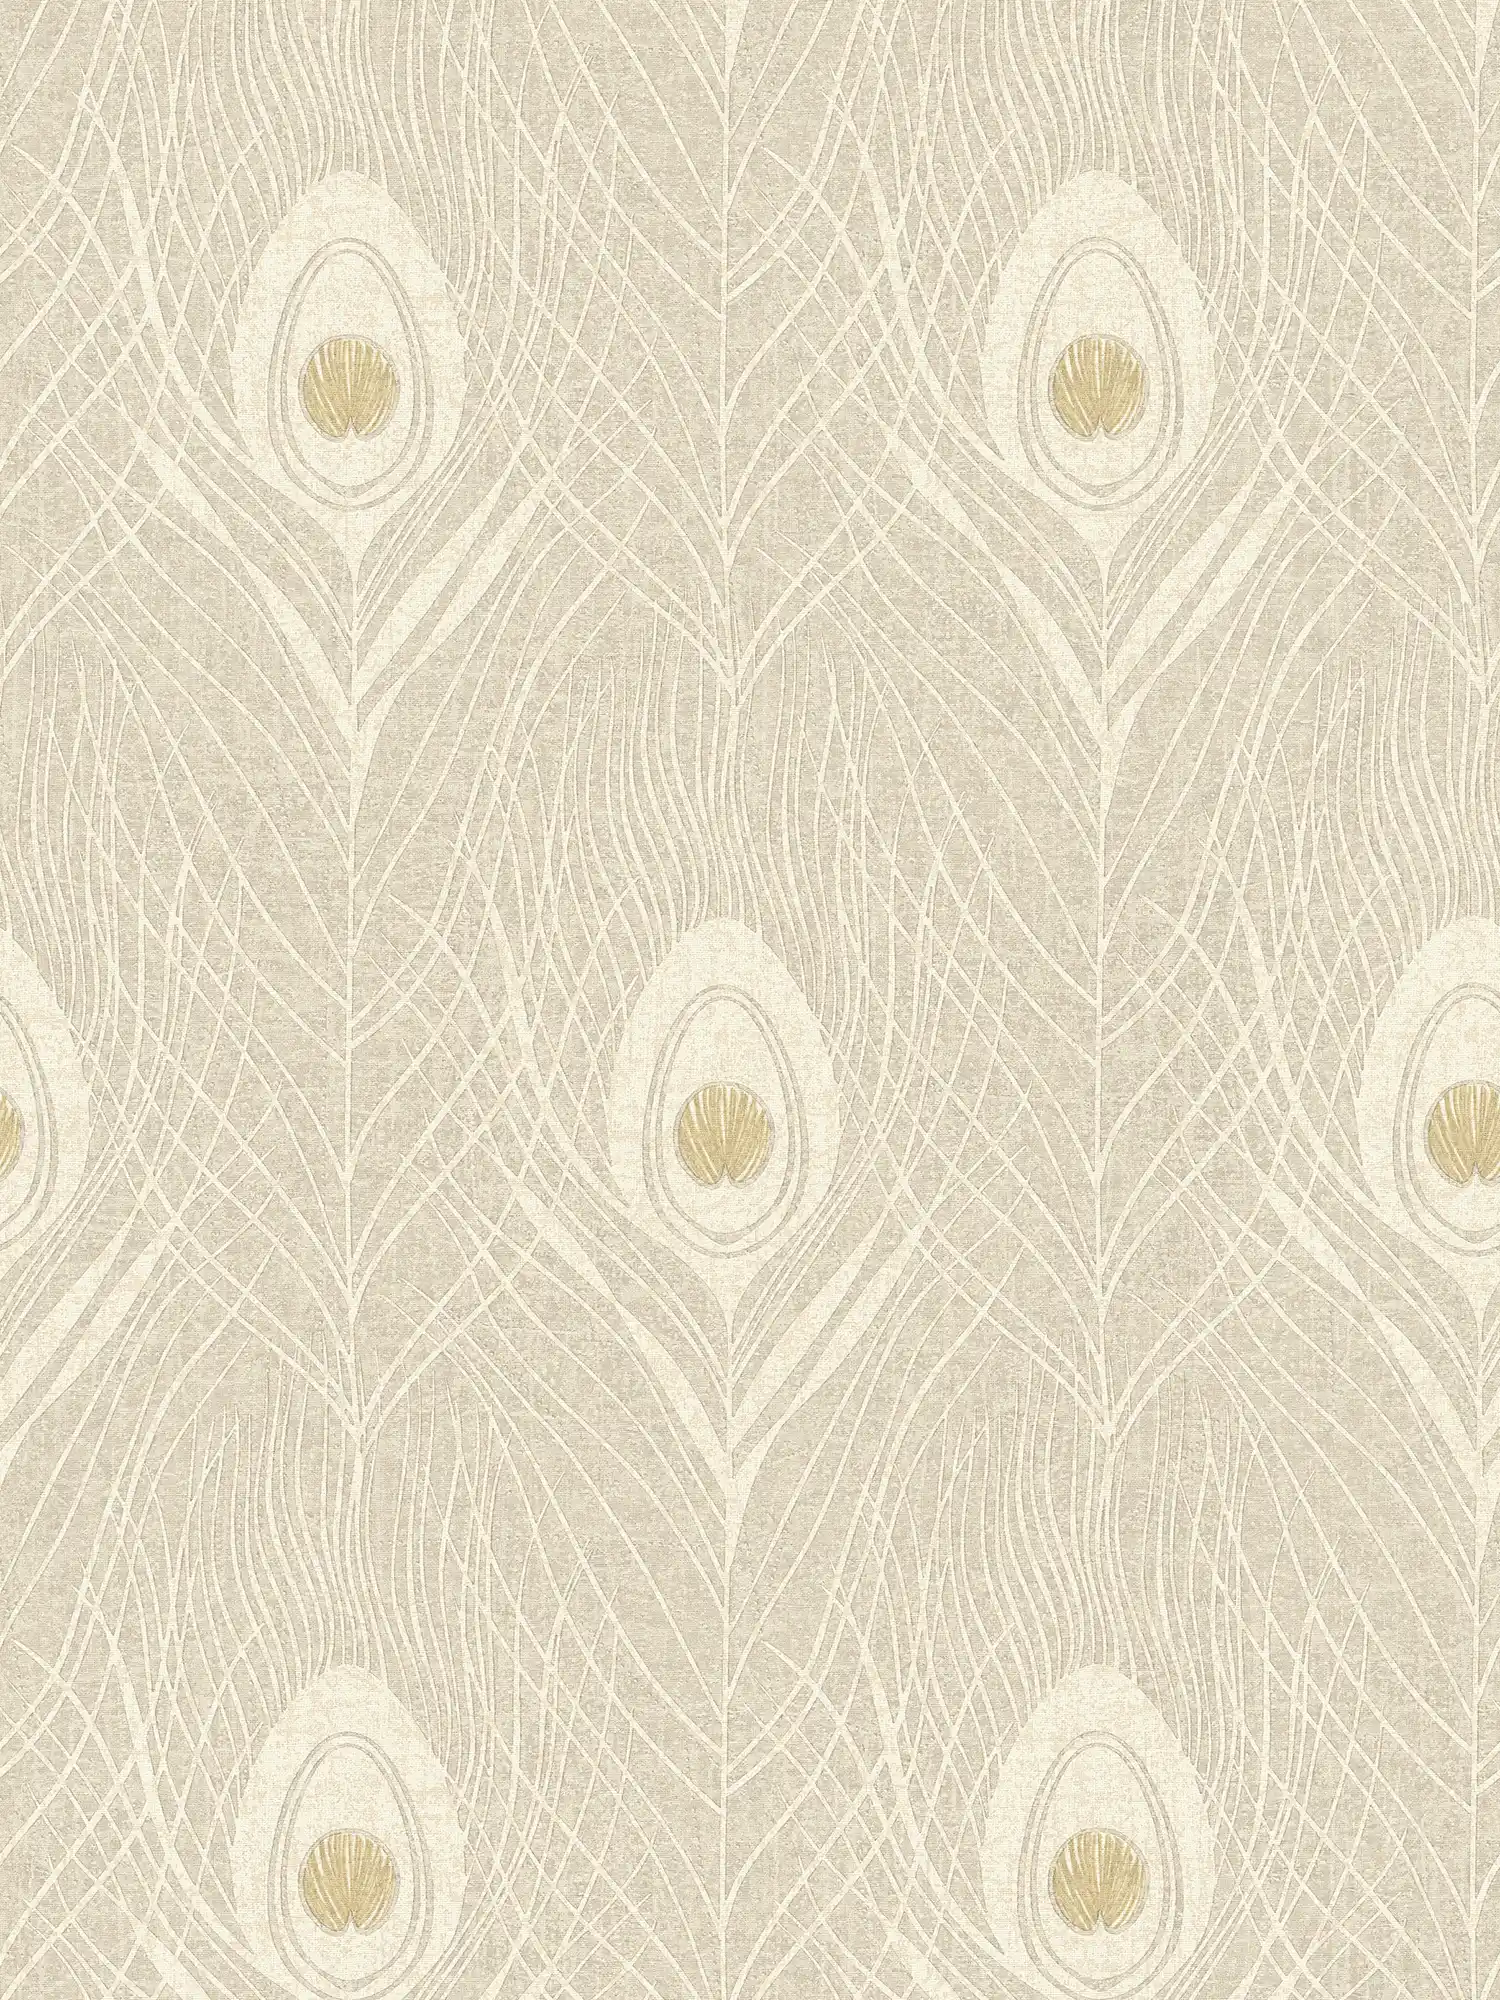 Sand coloured non-woven wallpaper with peacock feathers - beige, gold, grey
